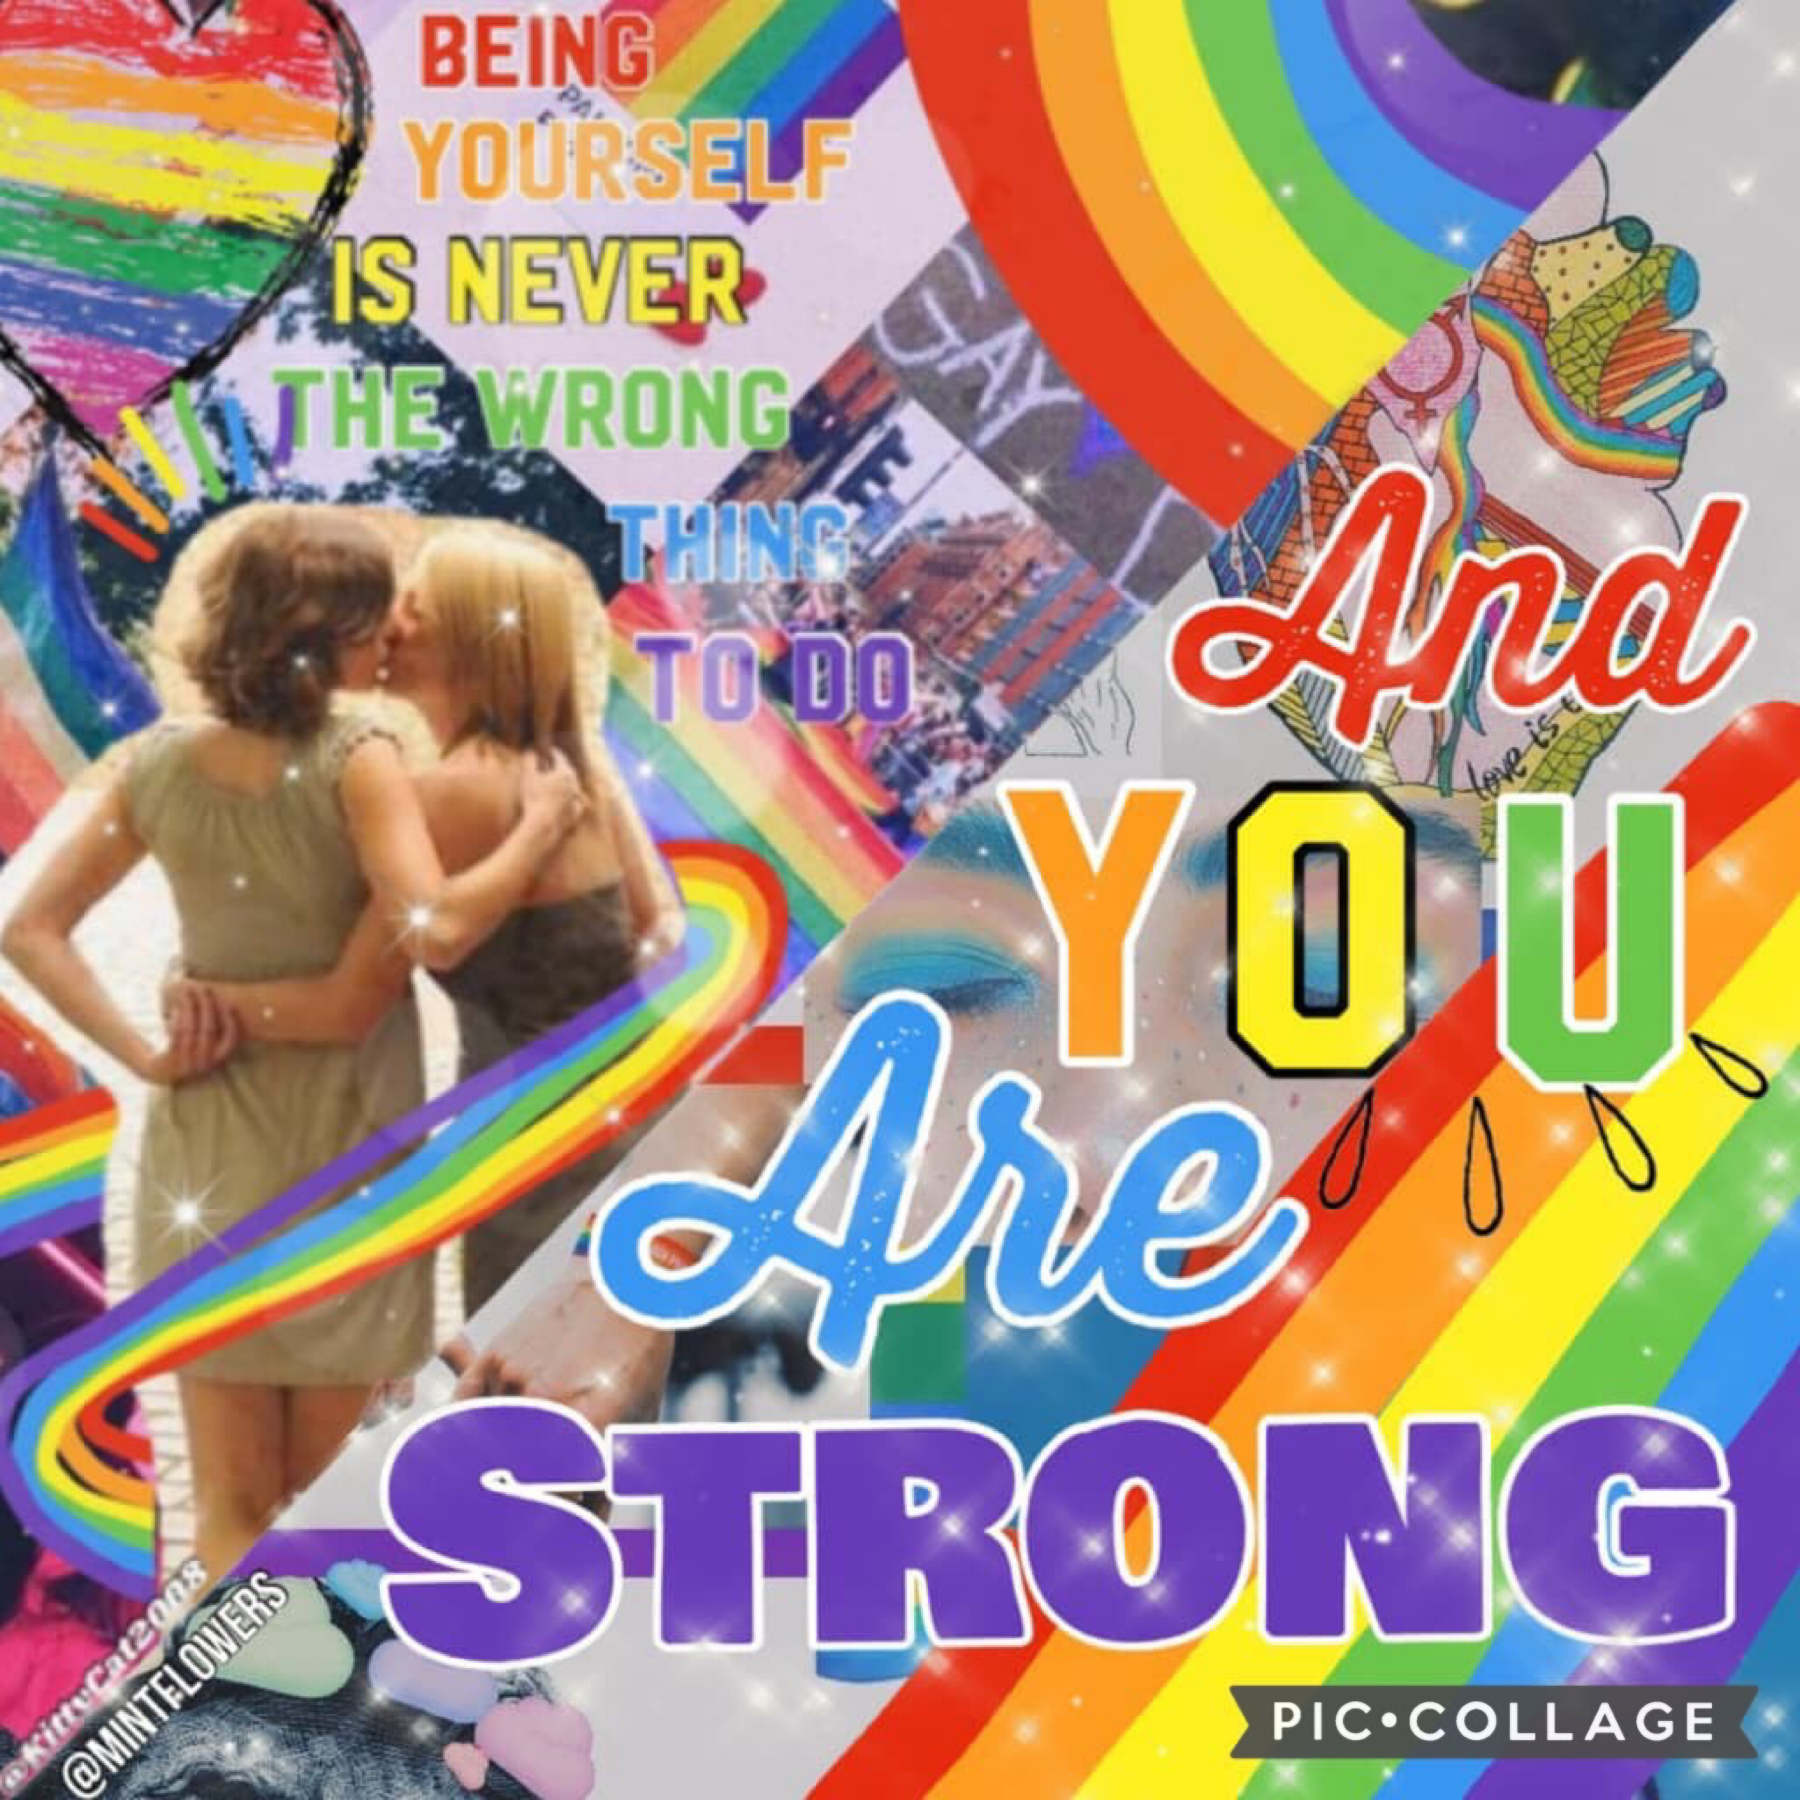 🏳️‍🌈tap🏳️‍🌈
Collab with KittyCat2008 !! Go follow them now!!
They did left part I did right part! 🏳️‍🌈🏳️‍🌈🏳️‍🌈🏳️‍🌈🏳️‍🌈🏳️‍🌈🏳️‍🌈🏳️‍🌈🏳️‍🌈🏳️‍🌈🏳️‍🌈🏳️‍🌈🏳️‍🌈🏳️‍🌈🏳️‍🌈🏳️‍🌈🏳️‍🌈🏳️‍🌈🏳️‍🌈🏳️‍🌈🏳️‍🌈🏳️‍🌈🏳️‍🌈🏳️‍🌈🏳️‍🌈🏳️‍🌈🏳️‍🌈❤️🧡💛💚💙💜